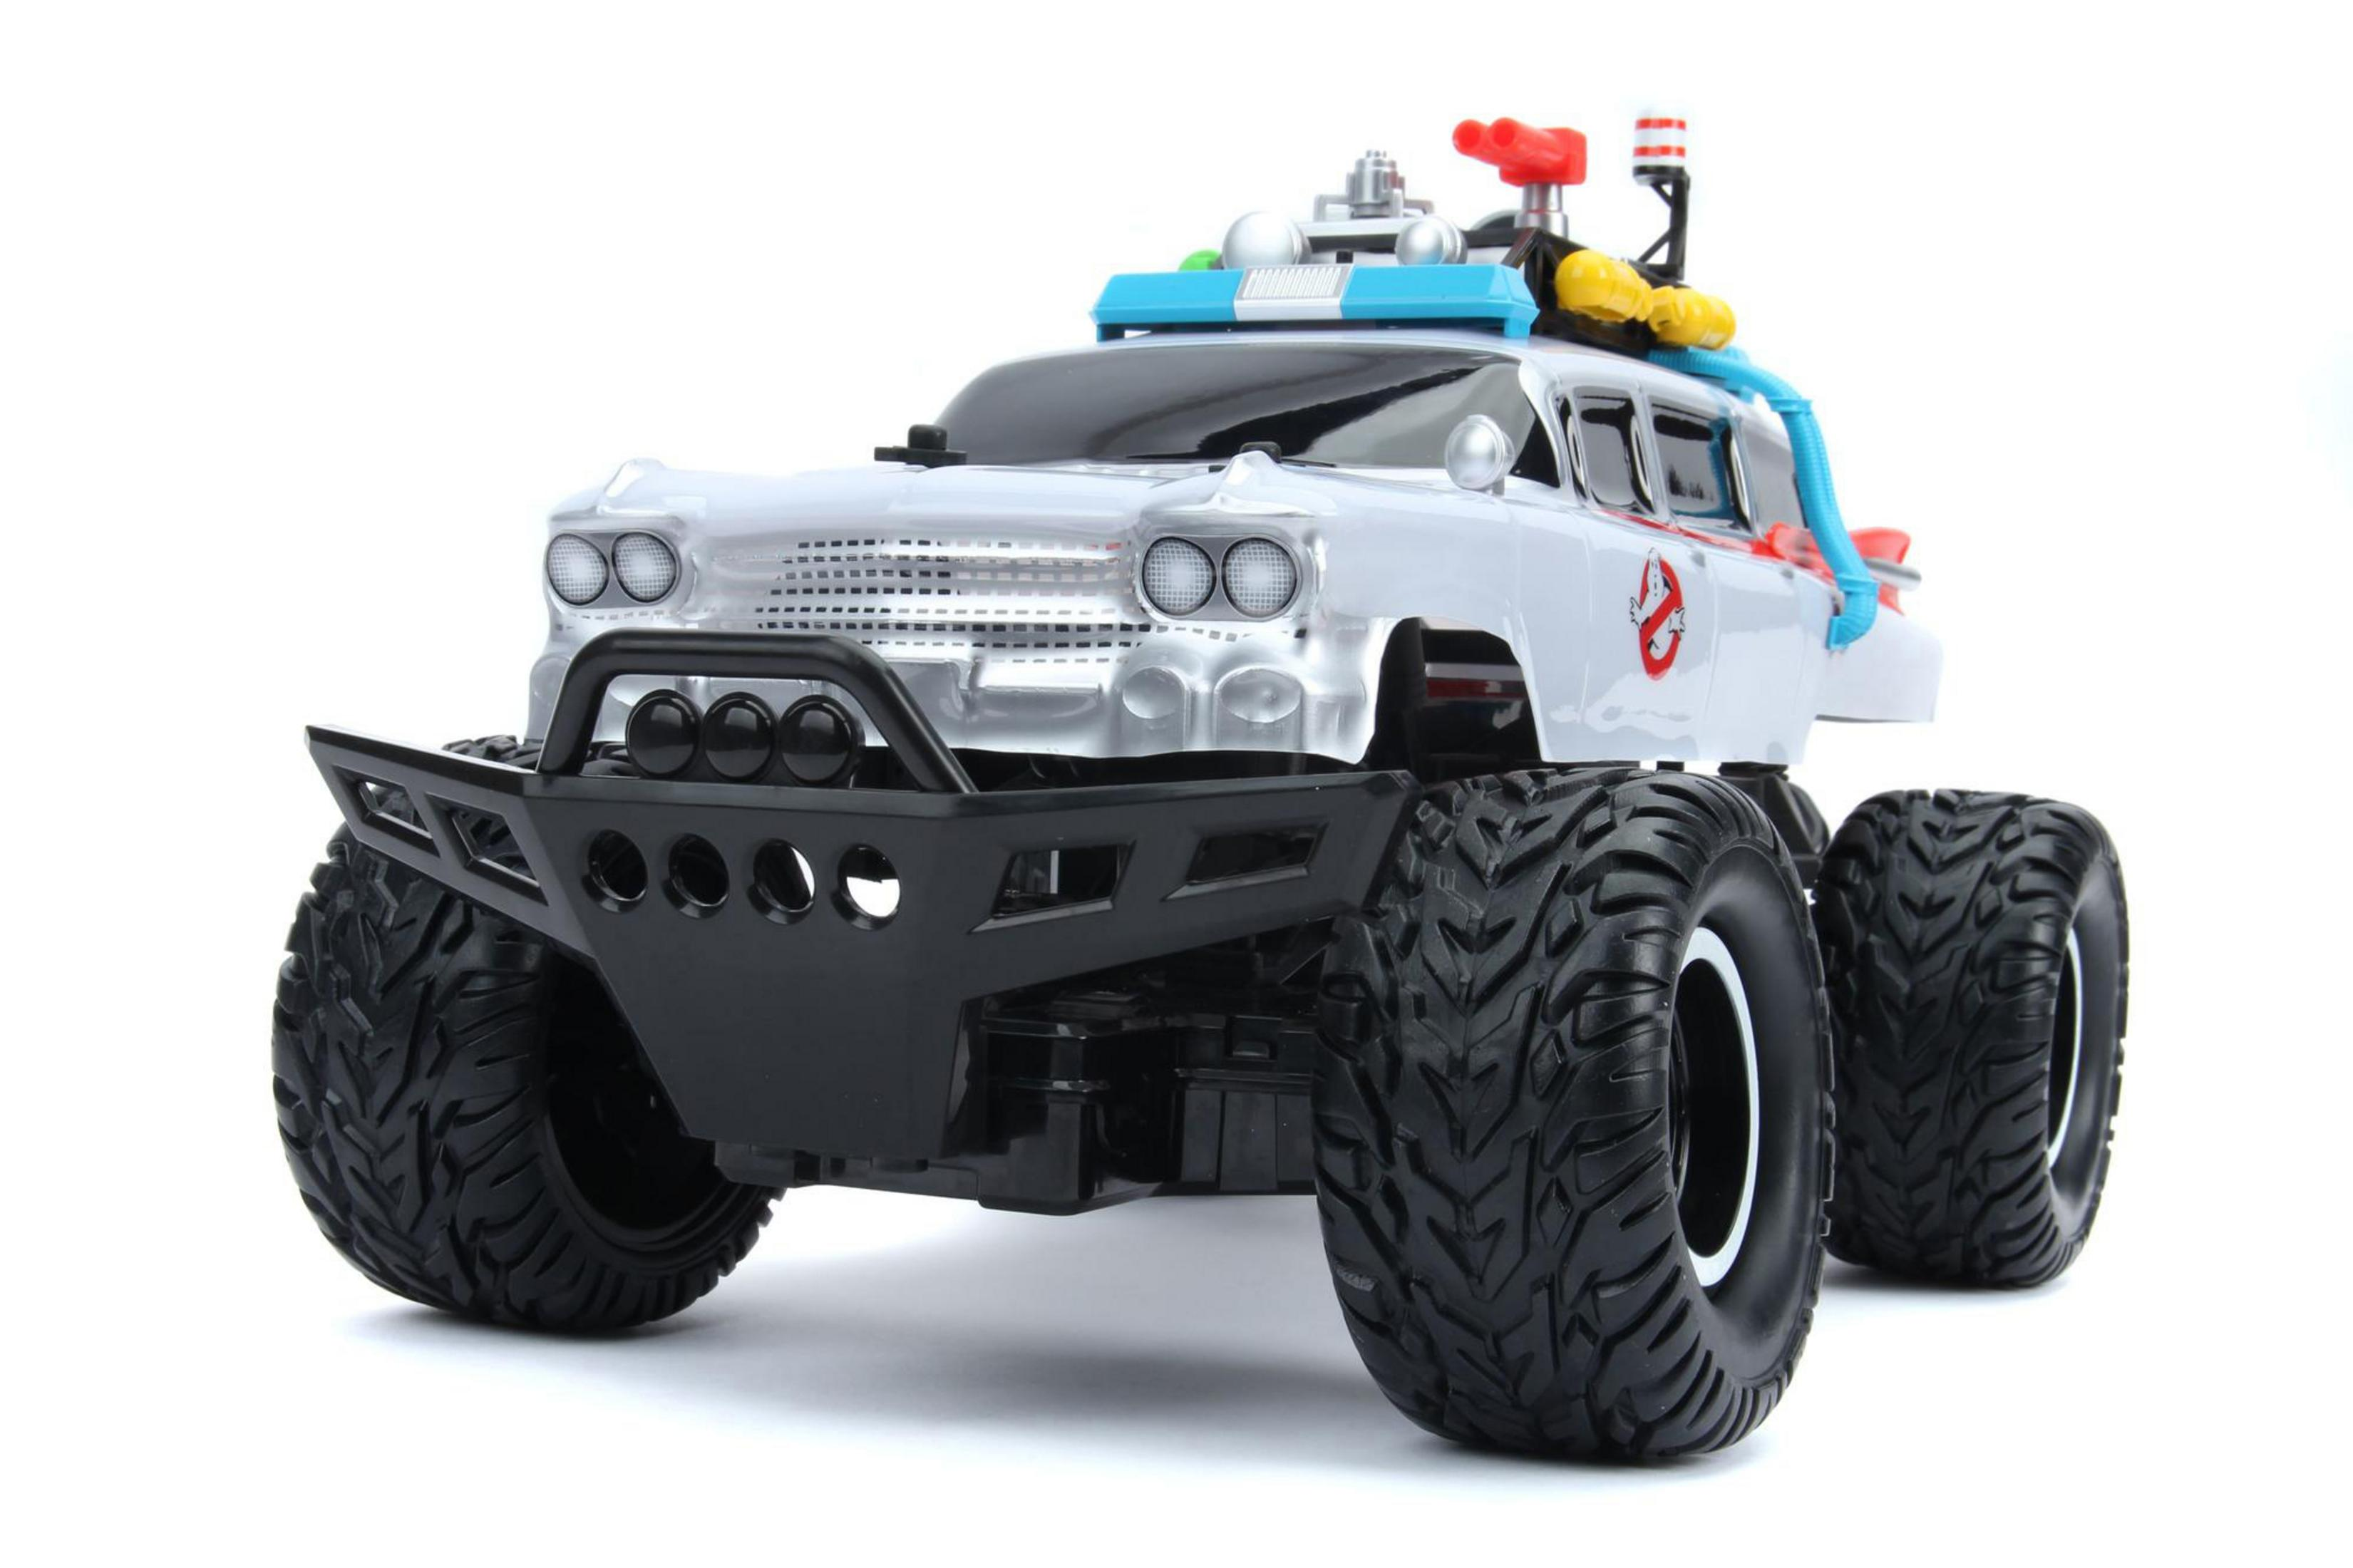 GHOSTBUSTERS TOYS Spielzeugauto, 253239000 R/C DICKIE OFFROAD Mehrfarbig RC